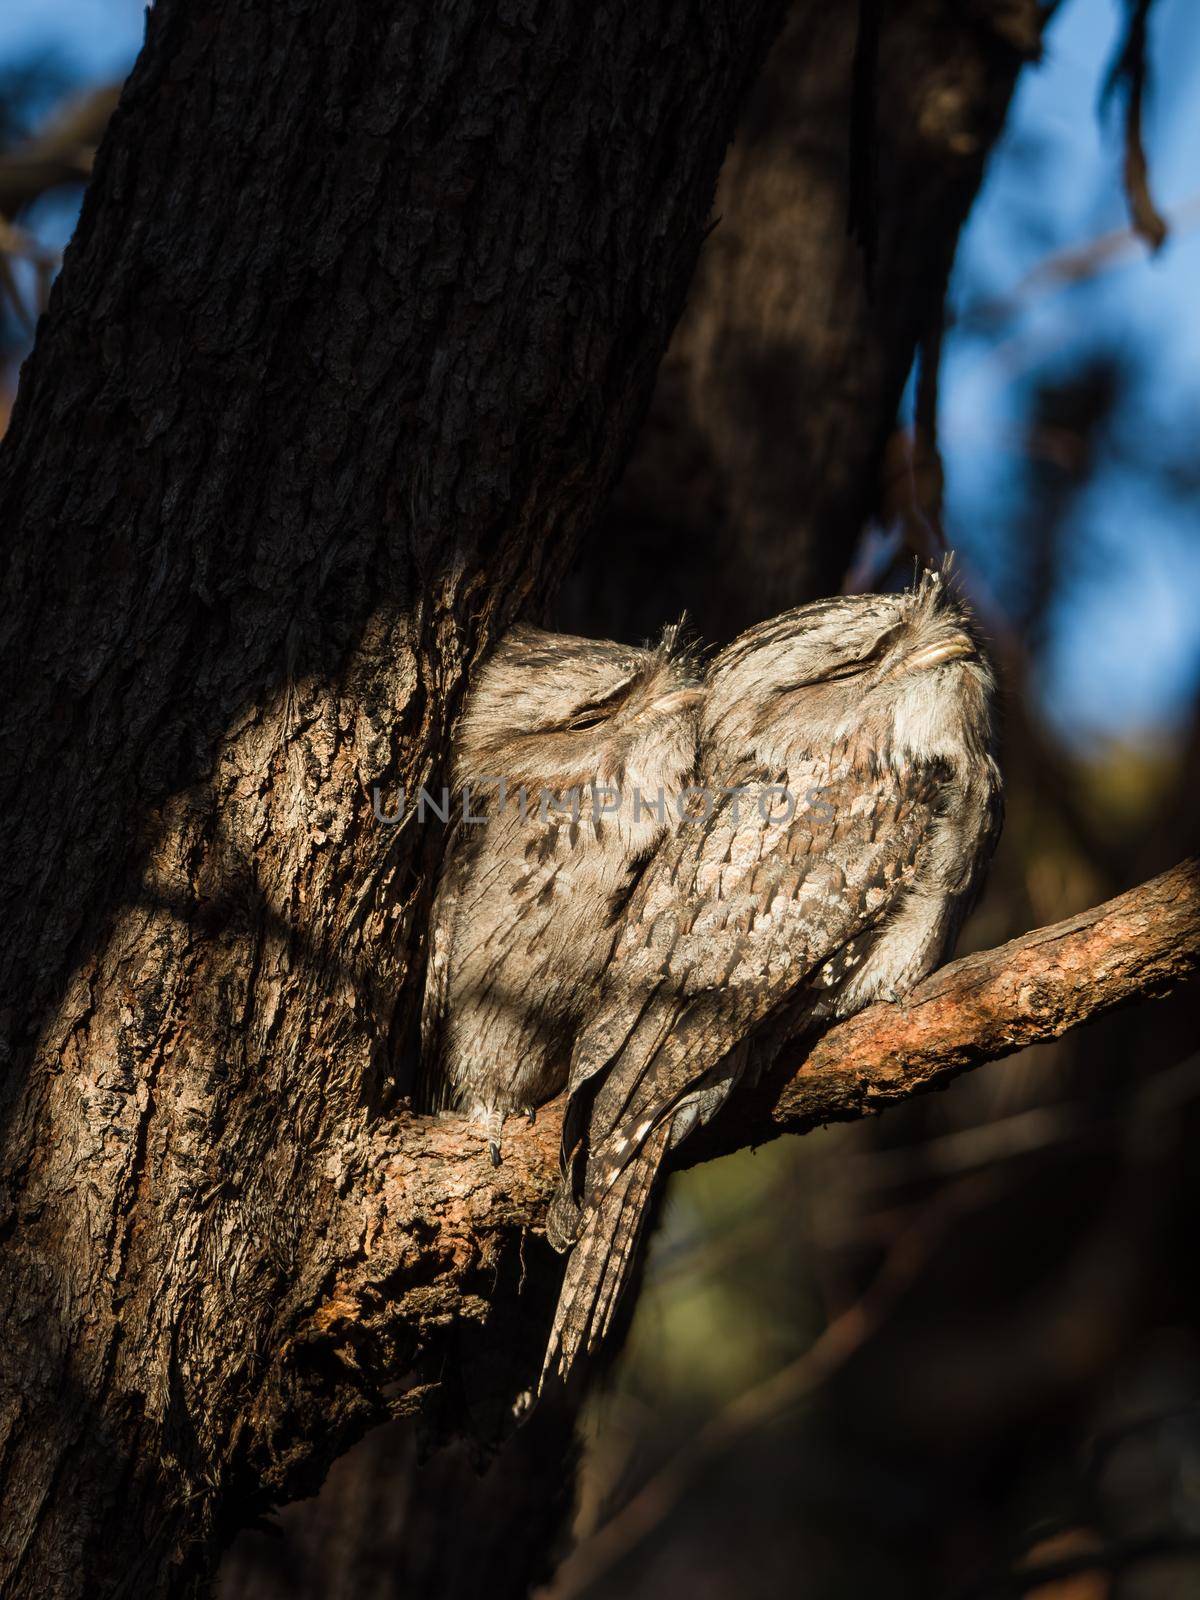 A pair of Tawny Frogmouth birds huddled together on a branch of a gum tree. High quality photo